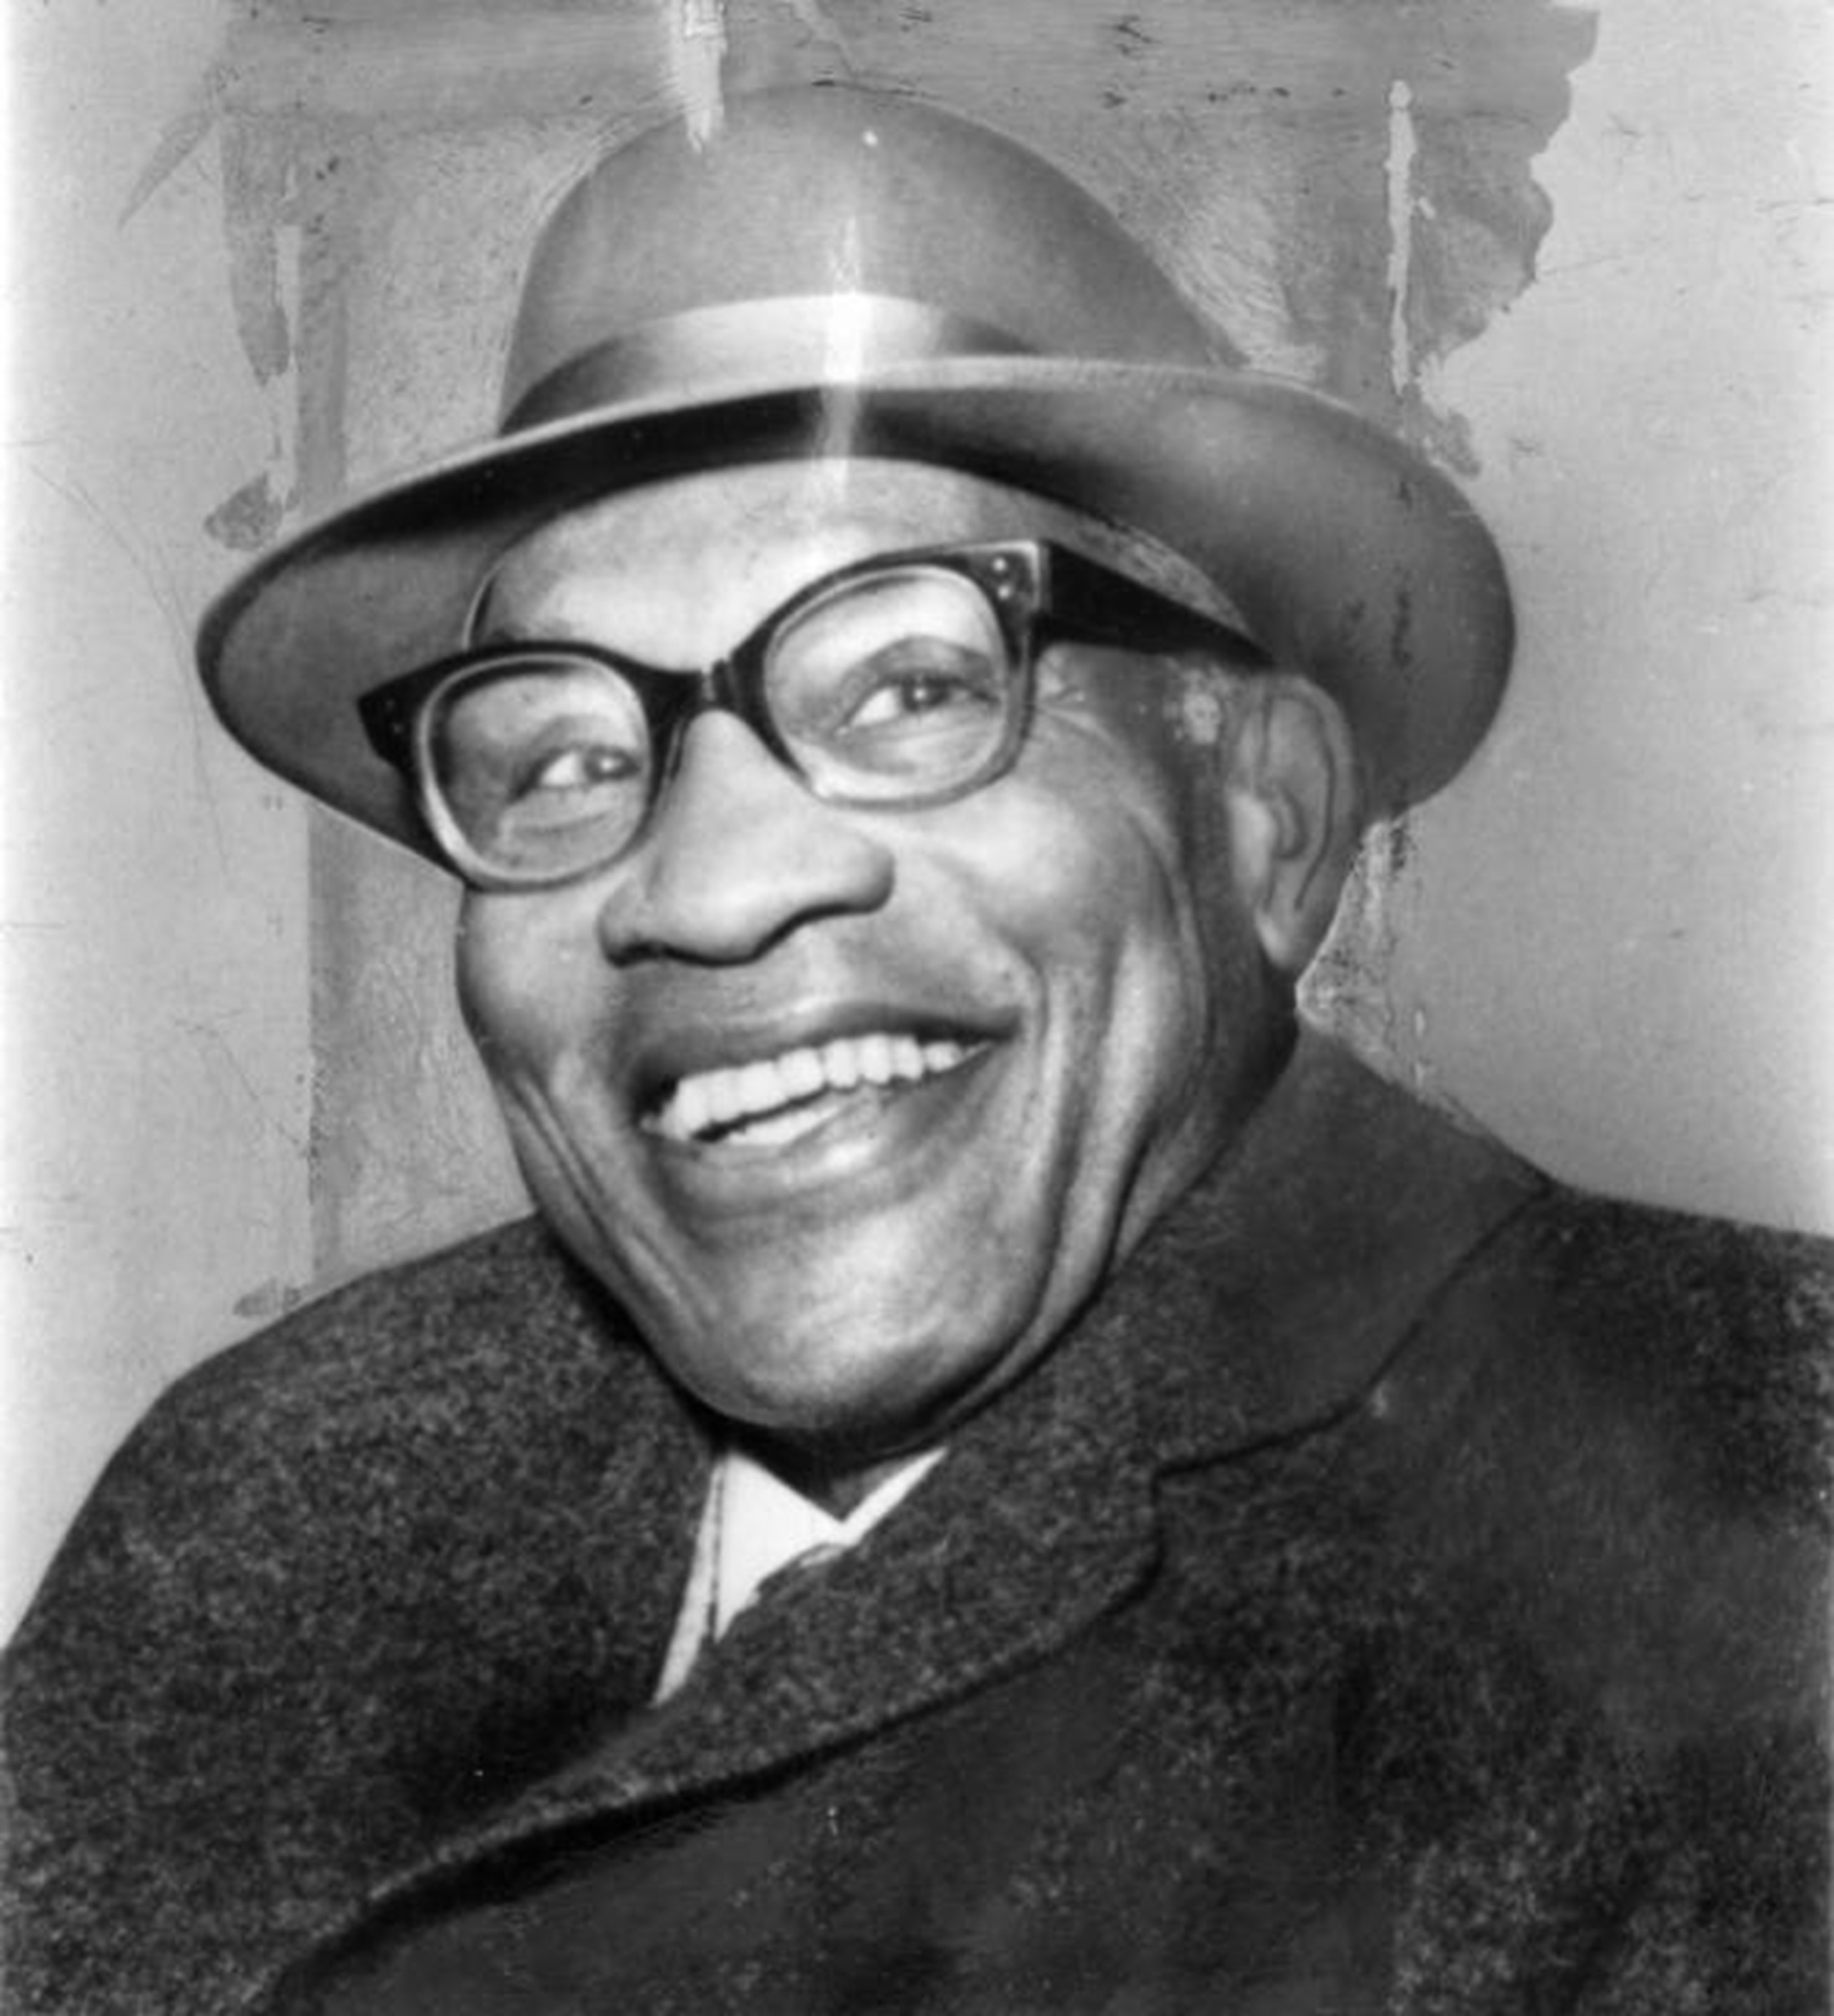 A candid black and white photo of a smiling Paul Robeson in his final years. Robeson’s pearly white teeth are prominent in the image, as are his large glasses. He is dressed in a dark wool winter coat and fedora.